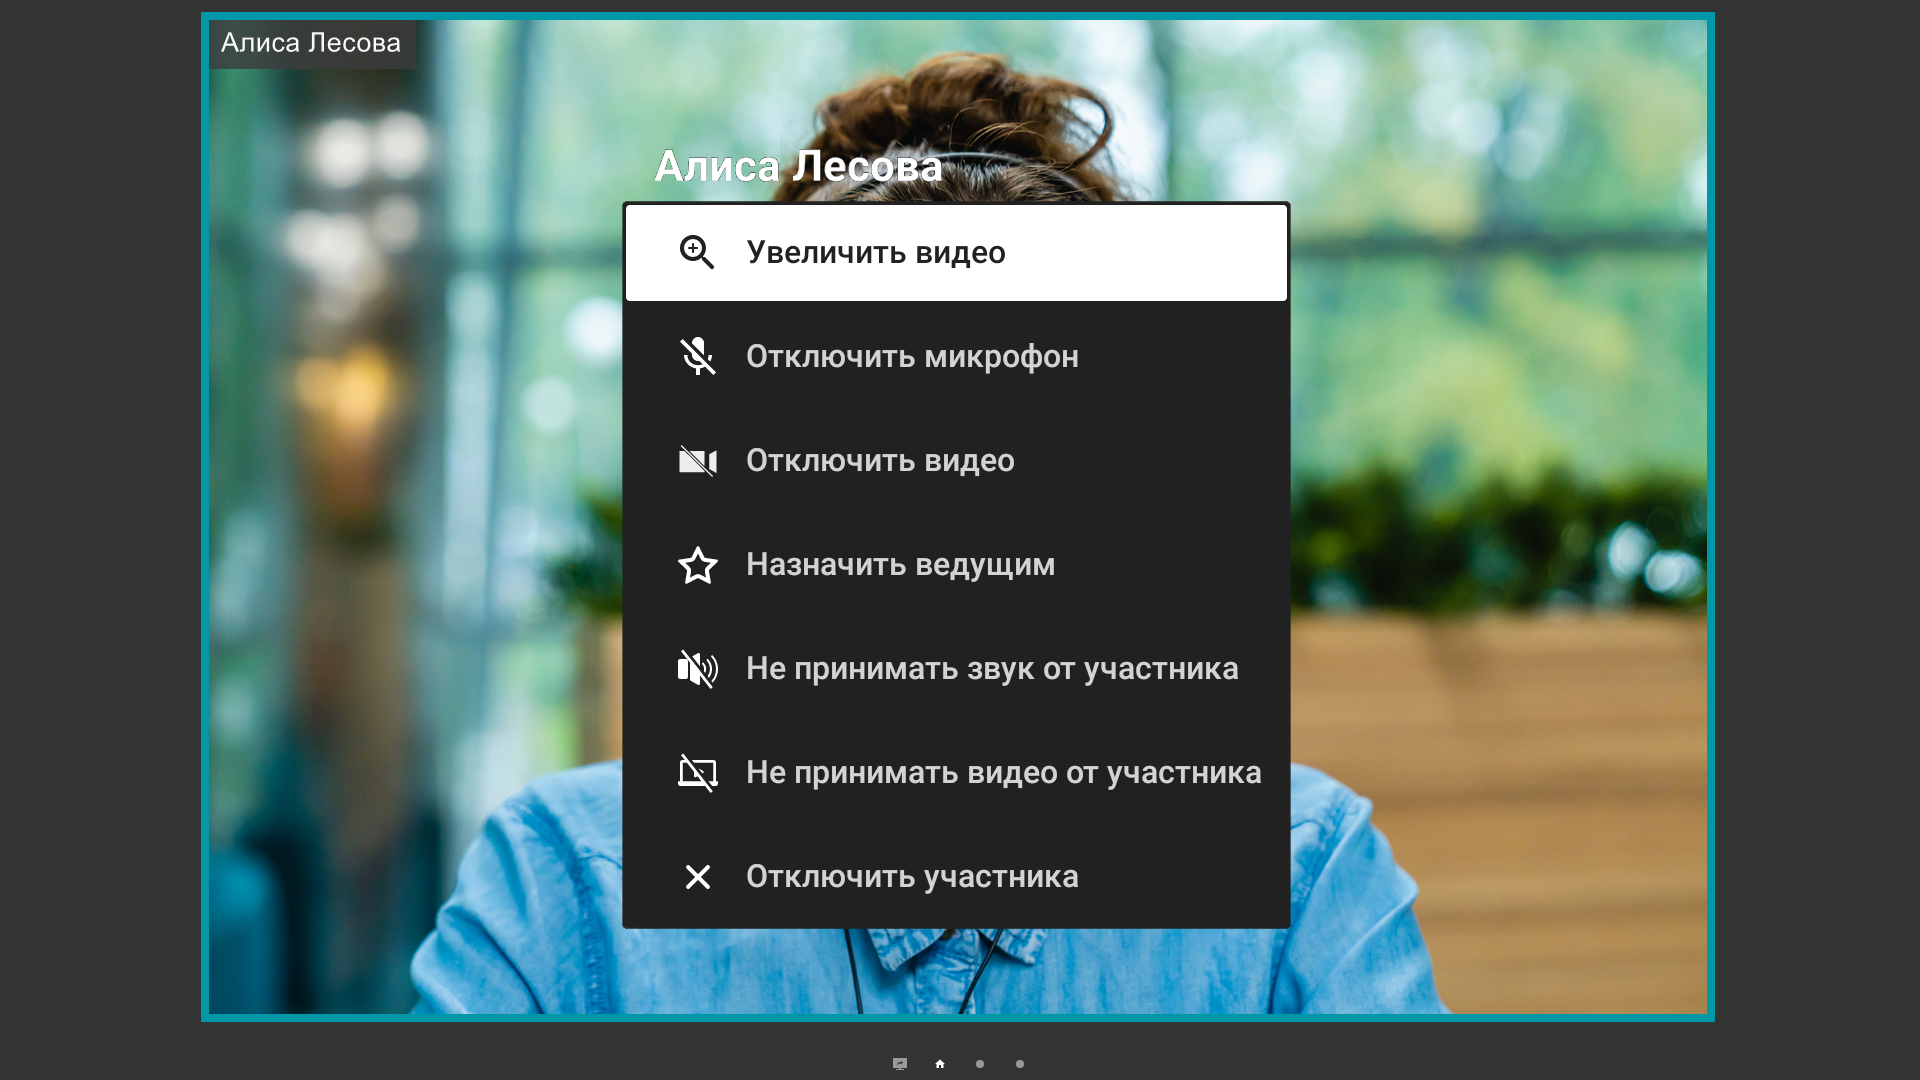 /client-android-tv/media/actions_on_video/ru.png